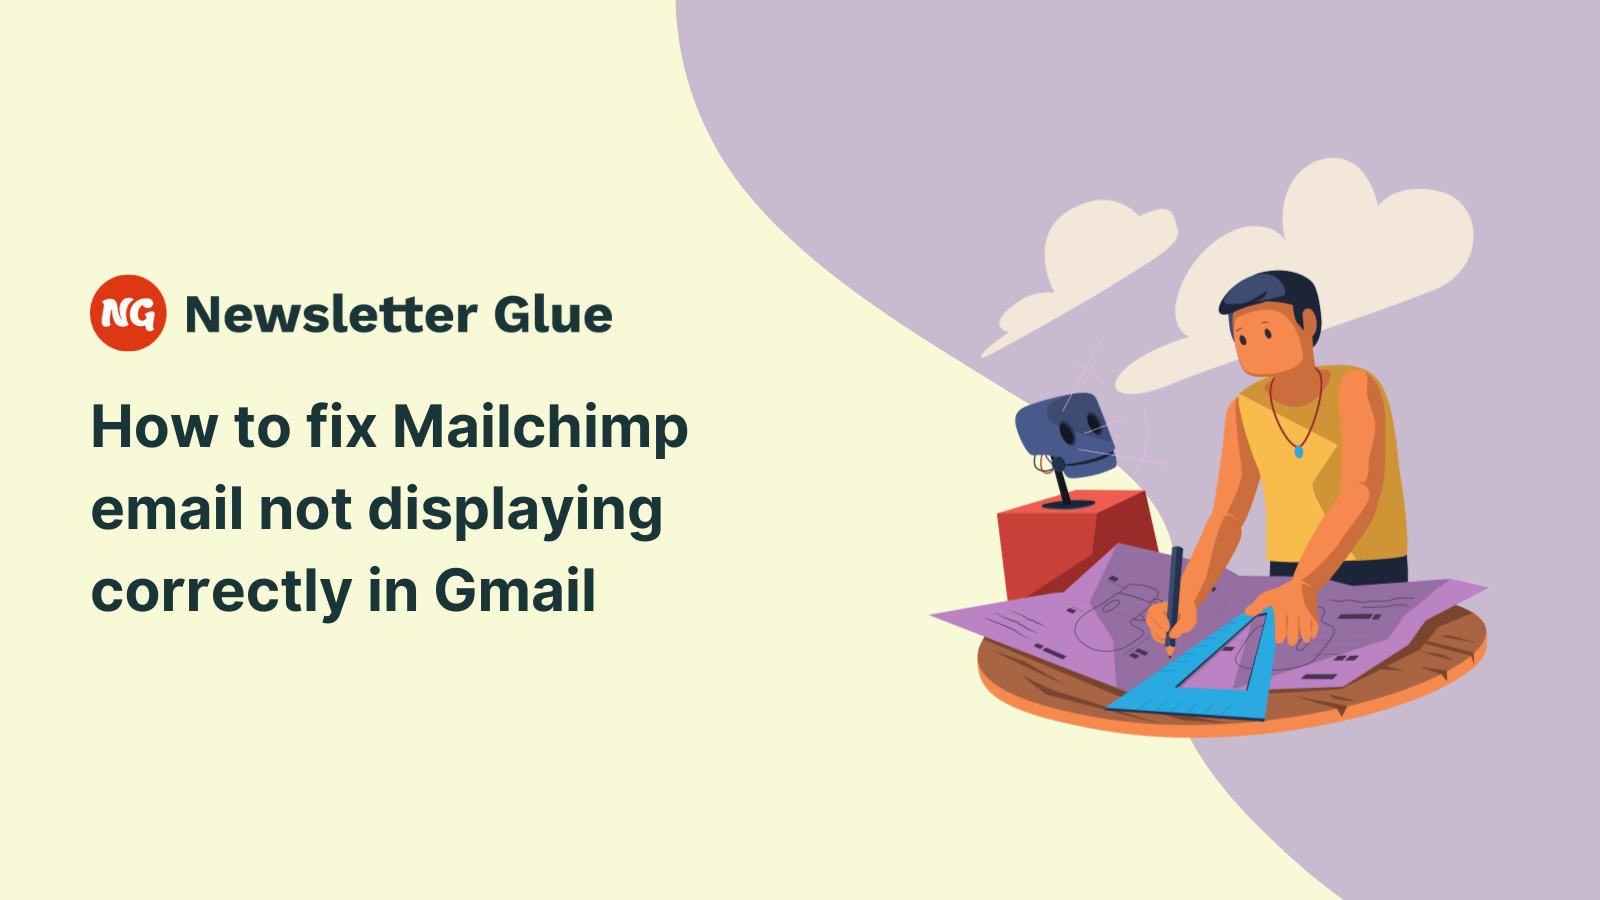 How to fix Mailchimp email not displaying correctly in Gmail